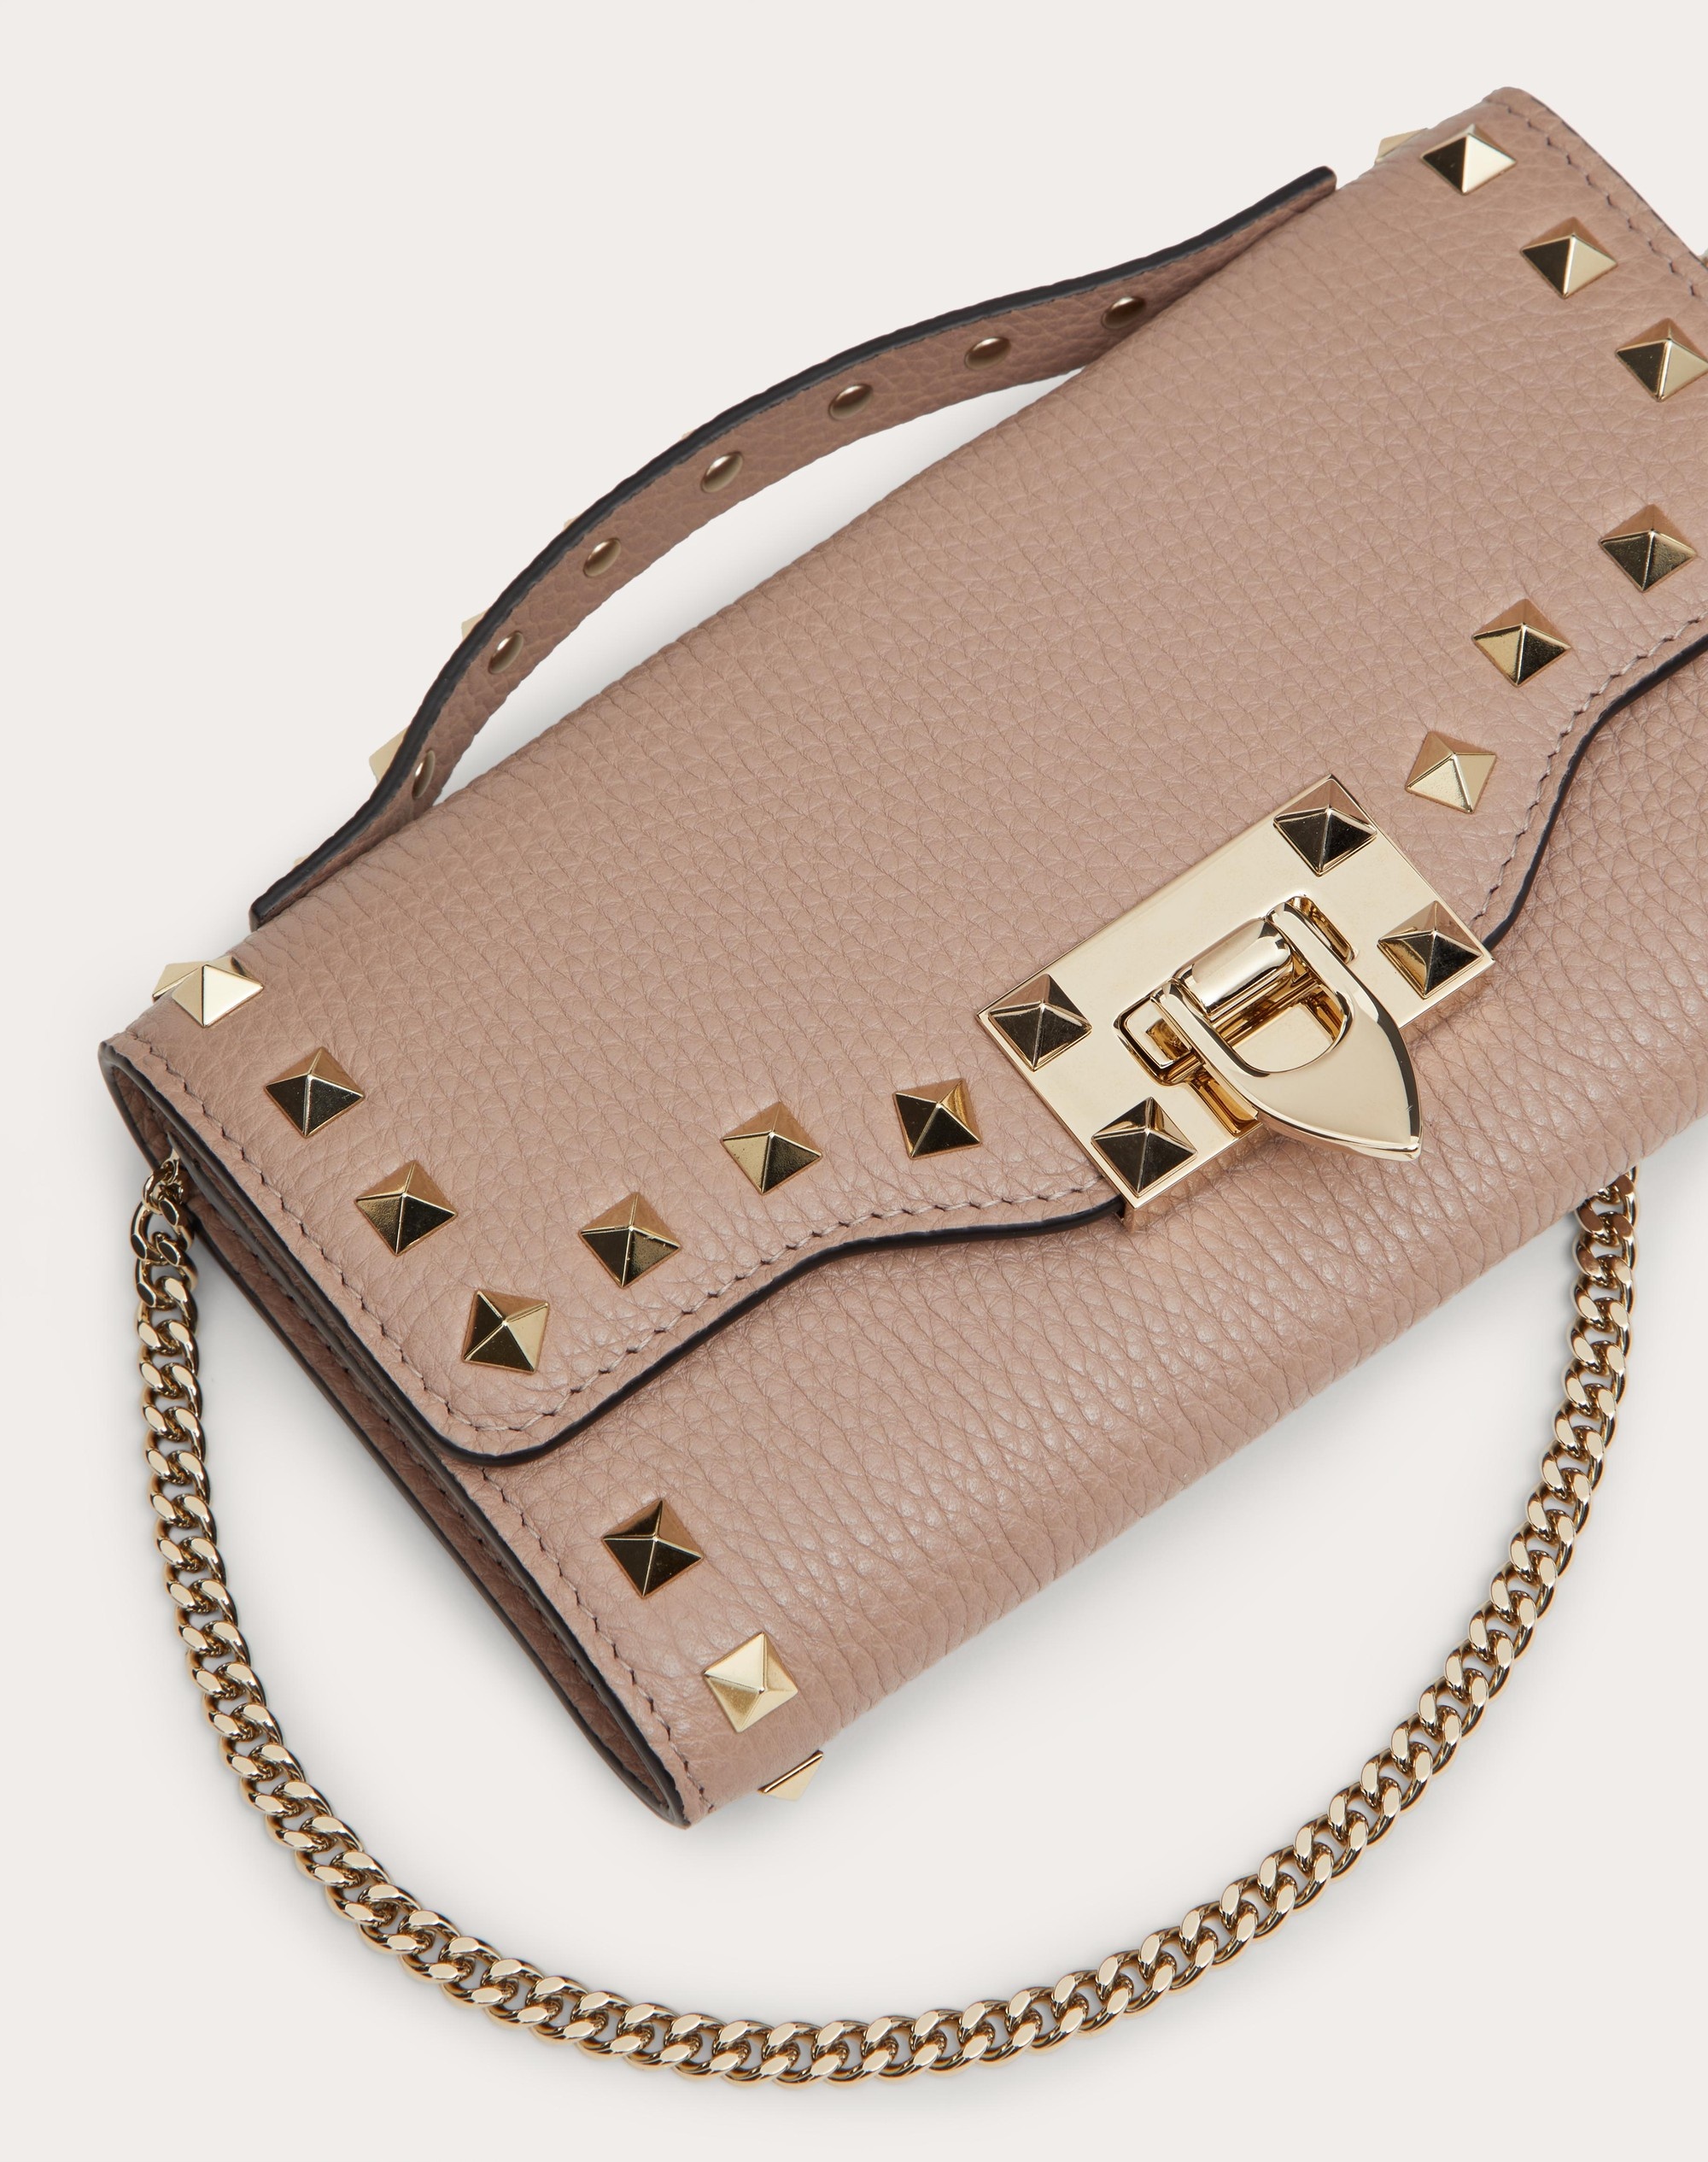 ROCKSTUD GRAINY CALFSKIN WALLET WITH CHAIN STRAP - 2